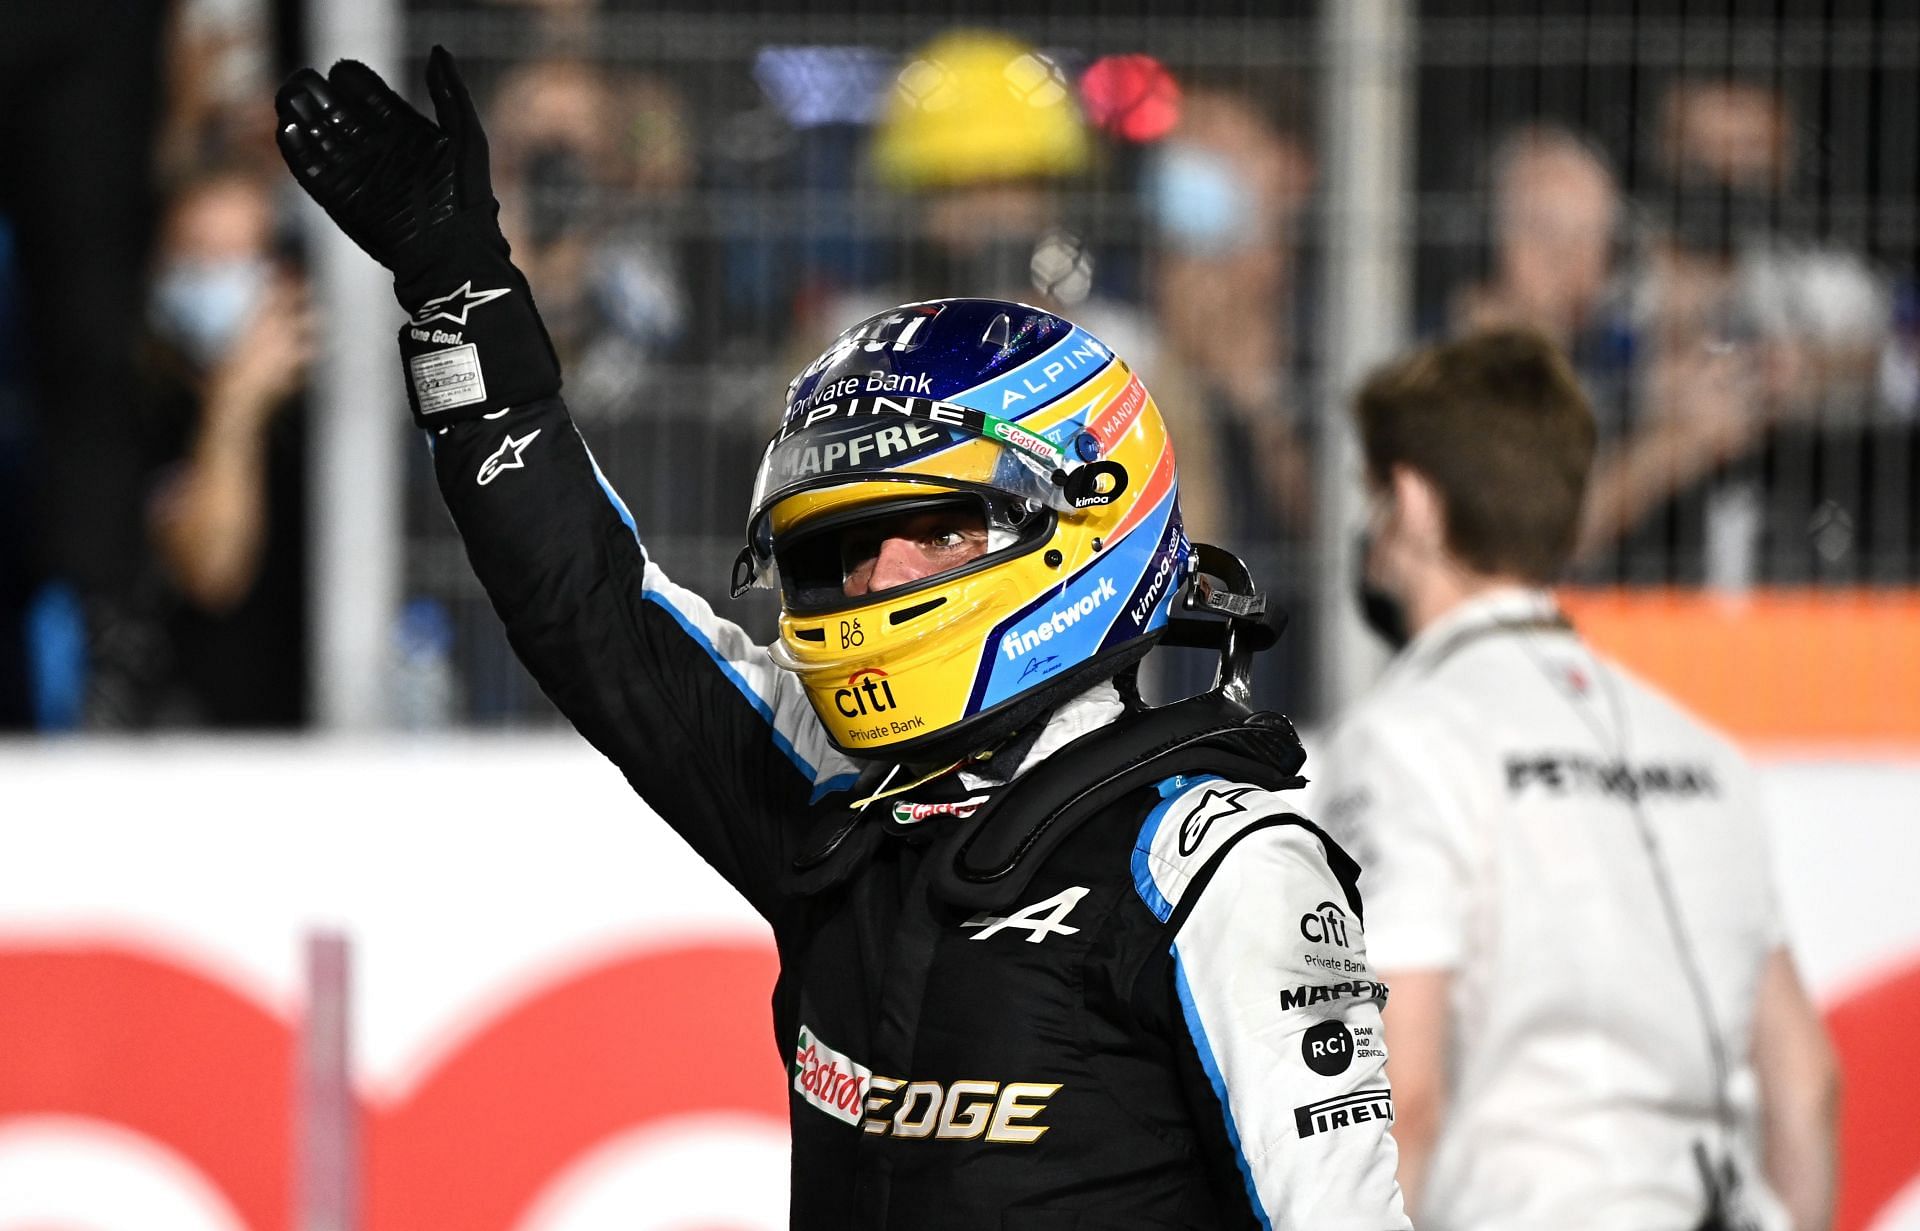 Third-placed Fernando Alonso in parc ferme after the Qatar Grand Prix.